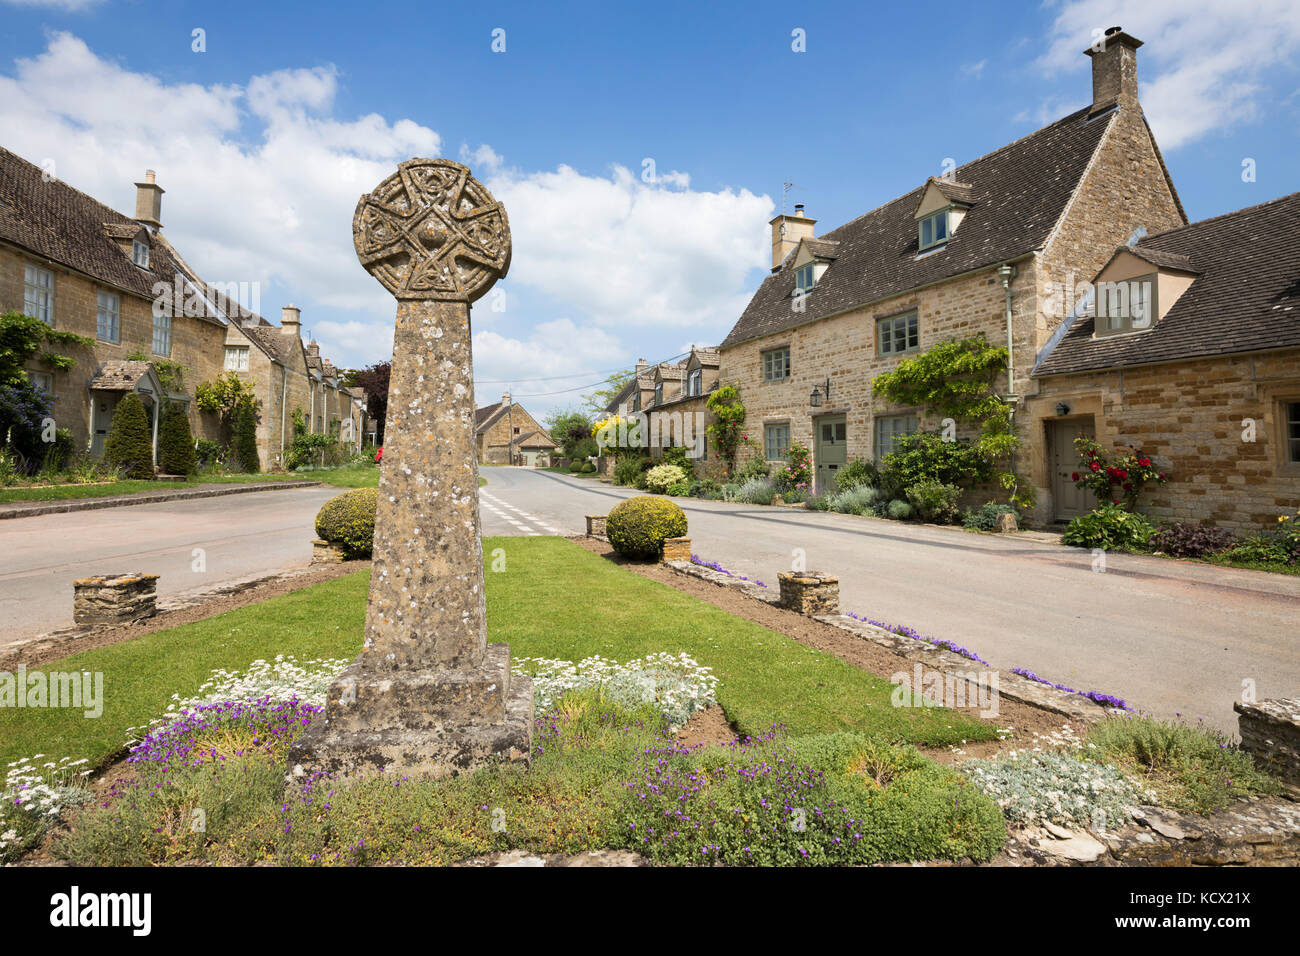 Cotswold stone cottages and stone cross in Icomb village, Icomb, Cotswolds, Gloucestershire, England, United Kingdom, Europe Stock Photo